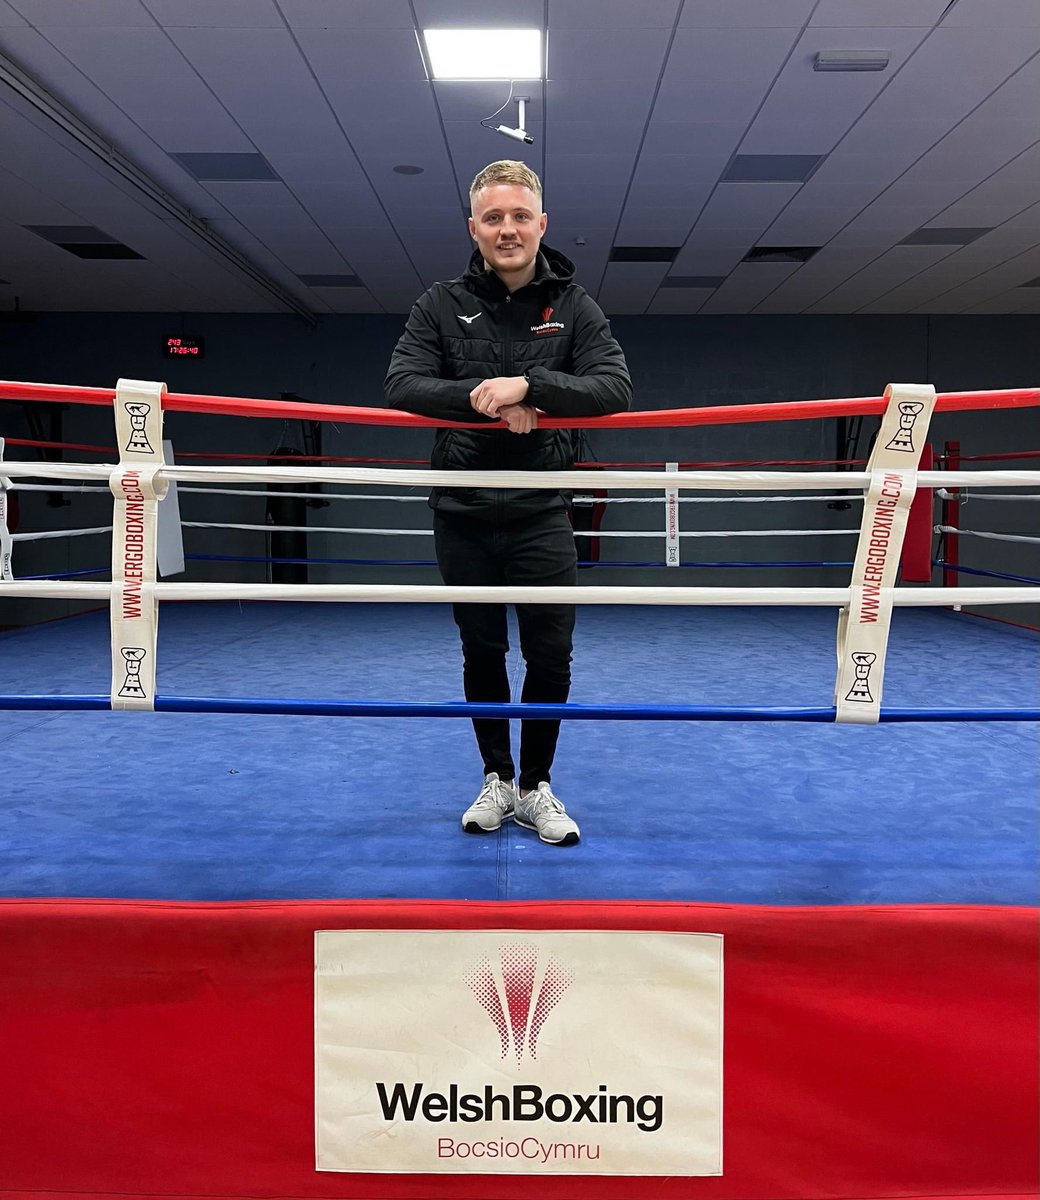 A new Head of Performance has been appointed by @WelshBoxing, the national governing body. Adam Park will take up the newly created role following an internal review of the organisation’s staff structure. 📰🔗 kocymru.com/news/welsh-box… ✍️ @DewiPowell